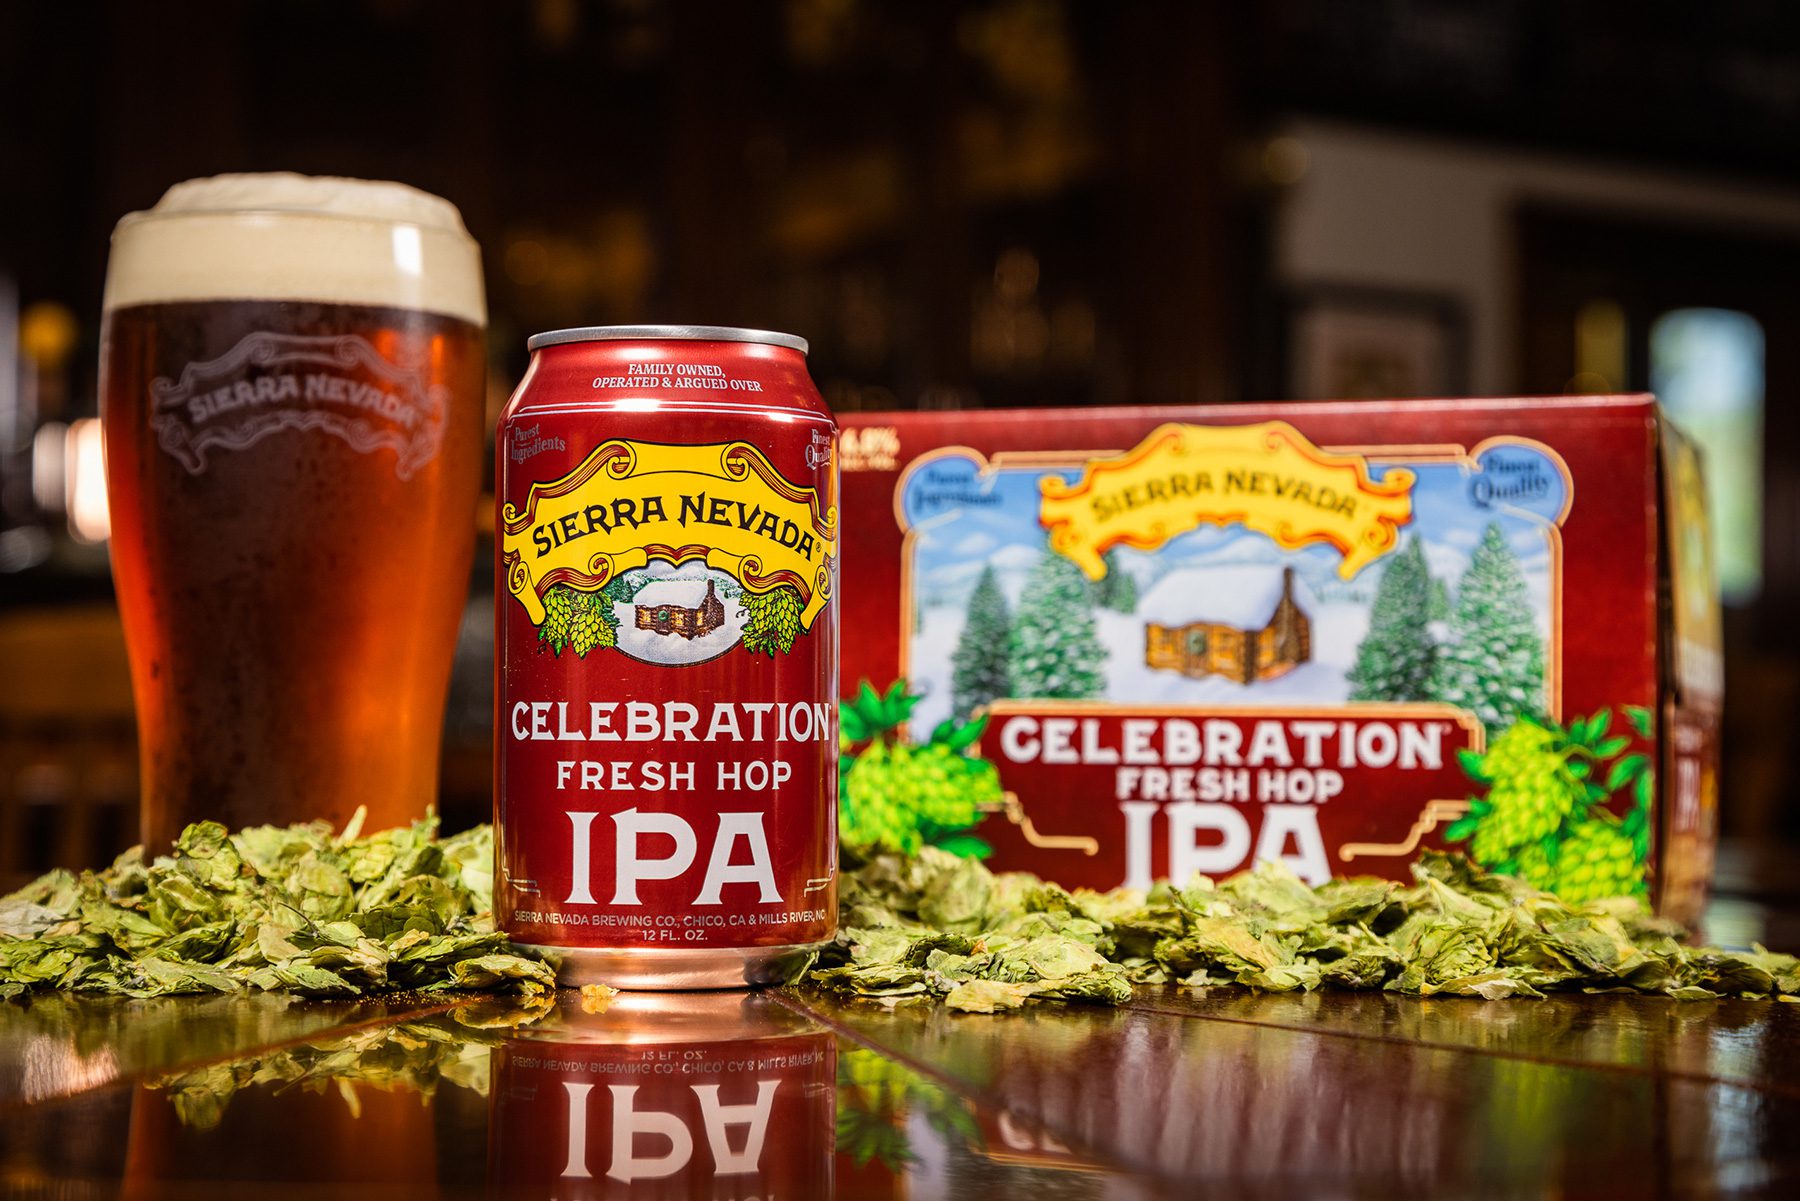 A pint glass, can, and six-pack of Sierra Nevada Celebration IPA